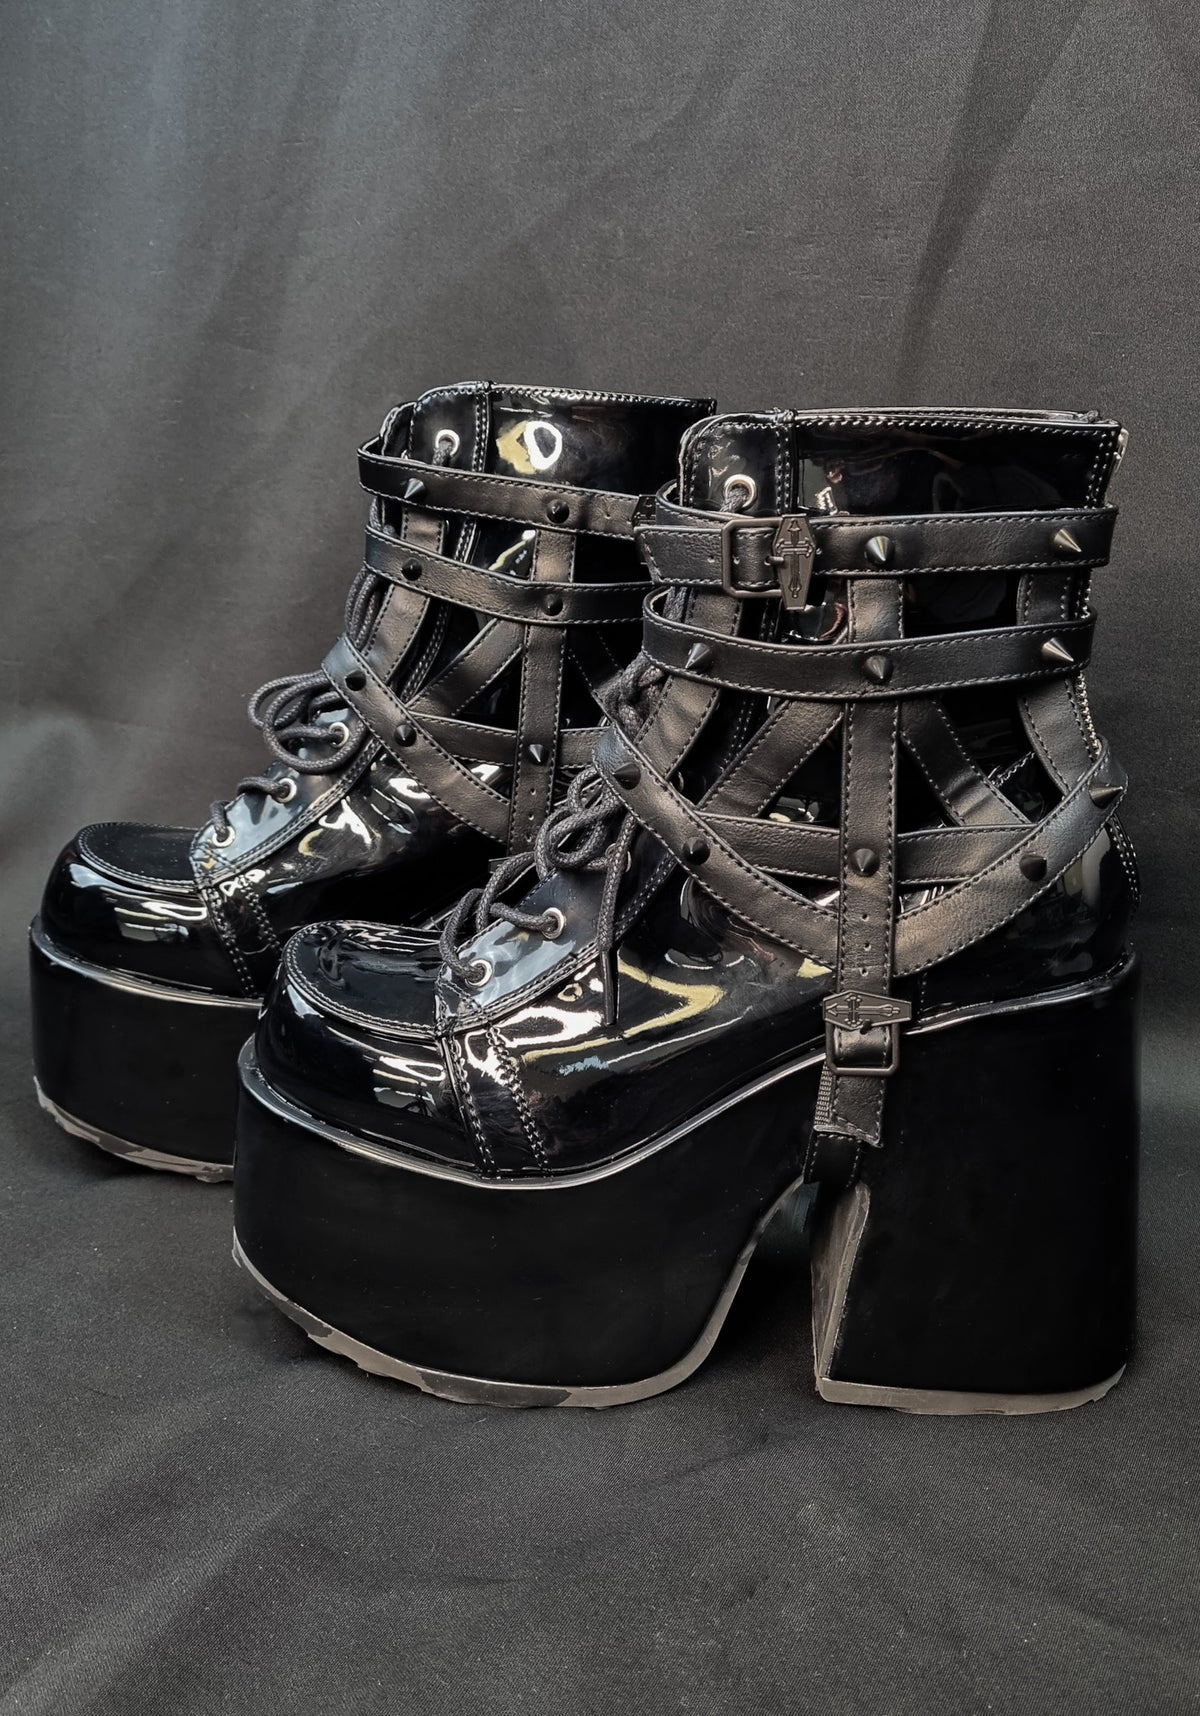 Spiked Cage [DA-505] | BOOT HARNESS